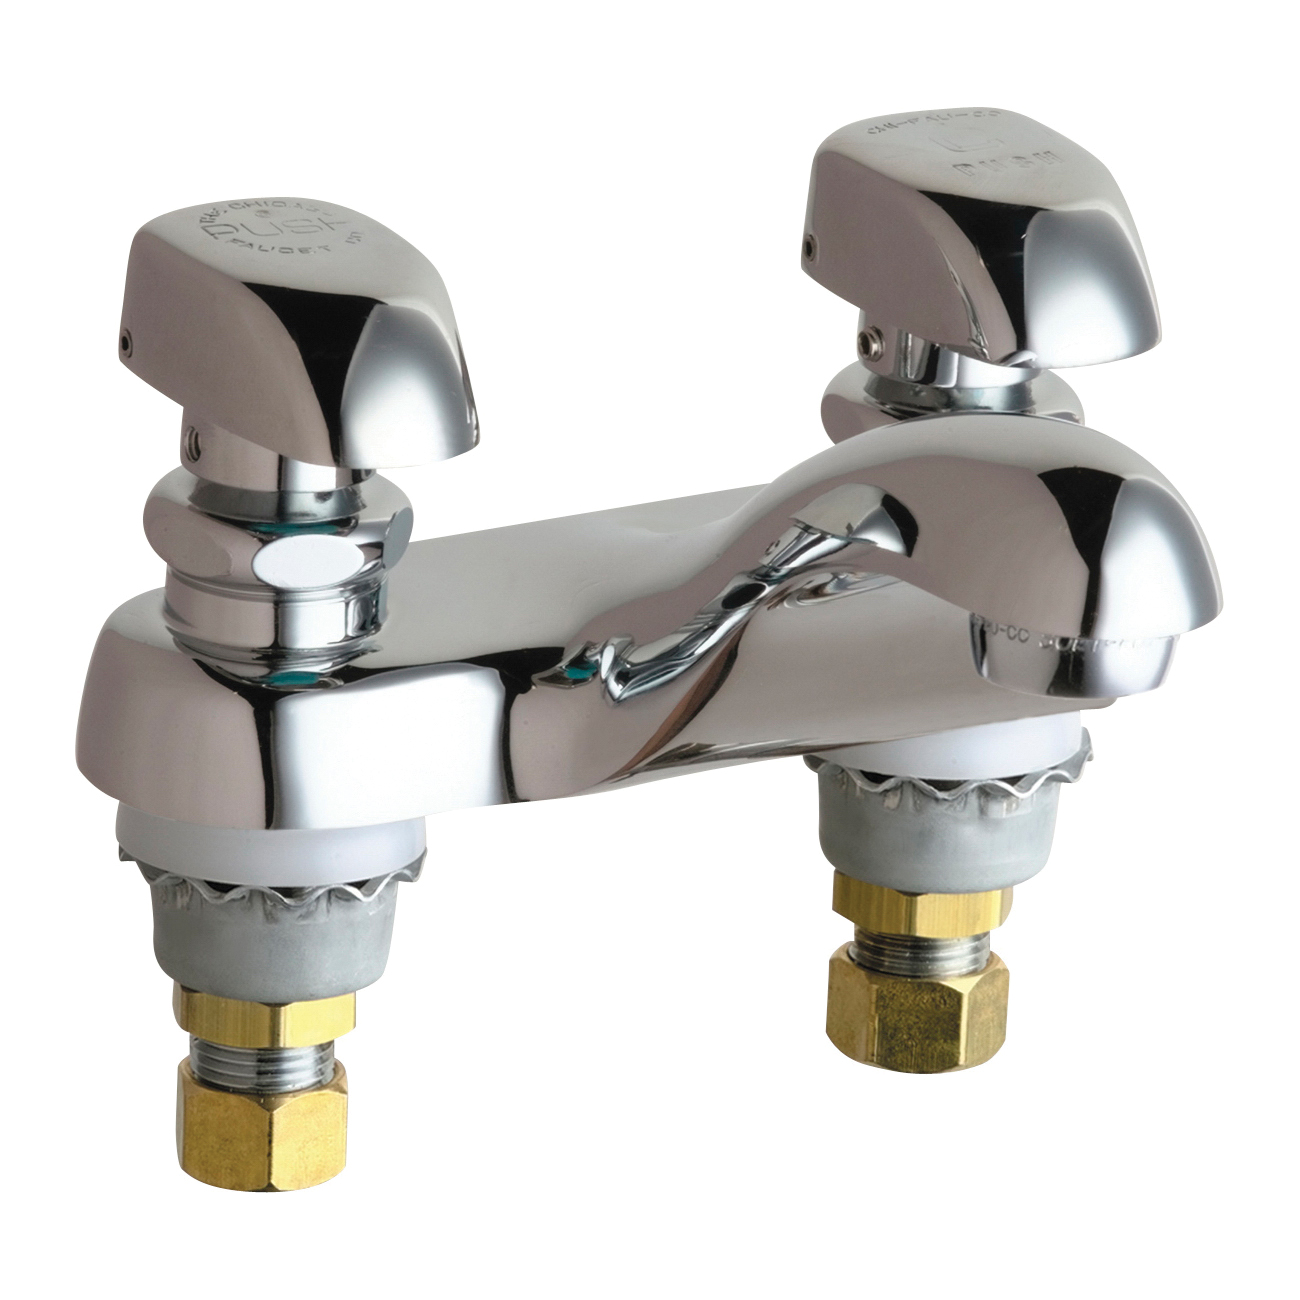 Chicago Faucet® 802-335ABCP Lavatory Sink Faucet, Chrome Plated, 2 Handles, 2.2 gpm